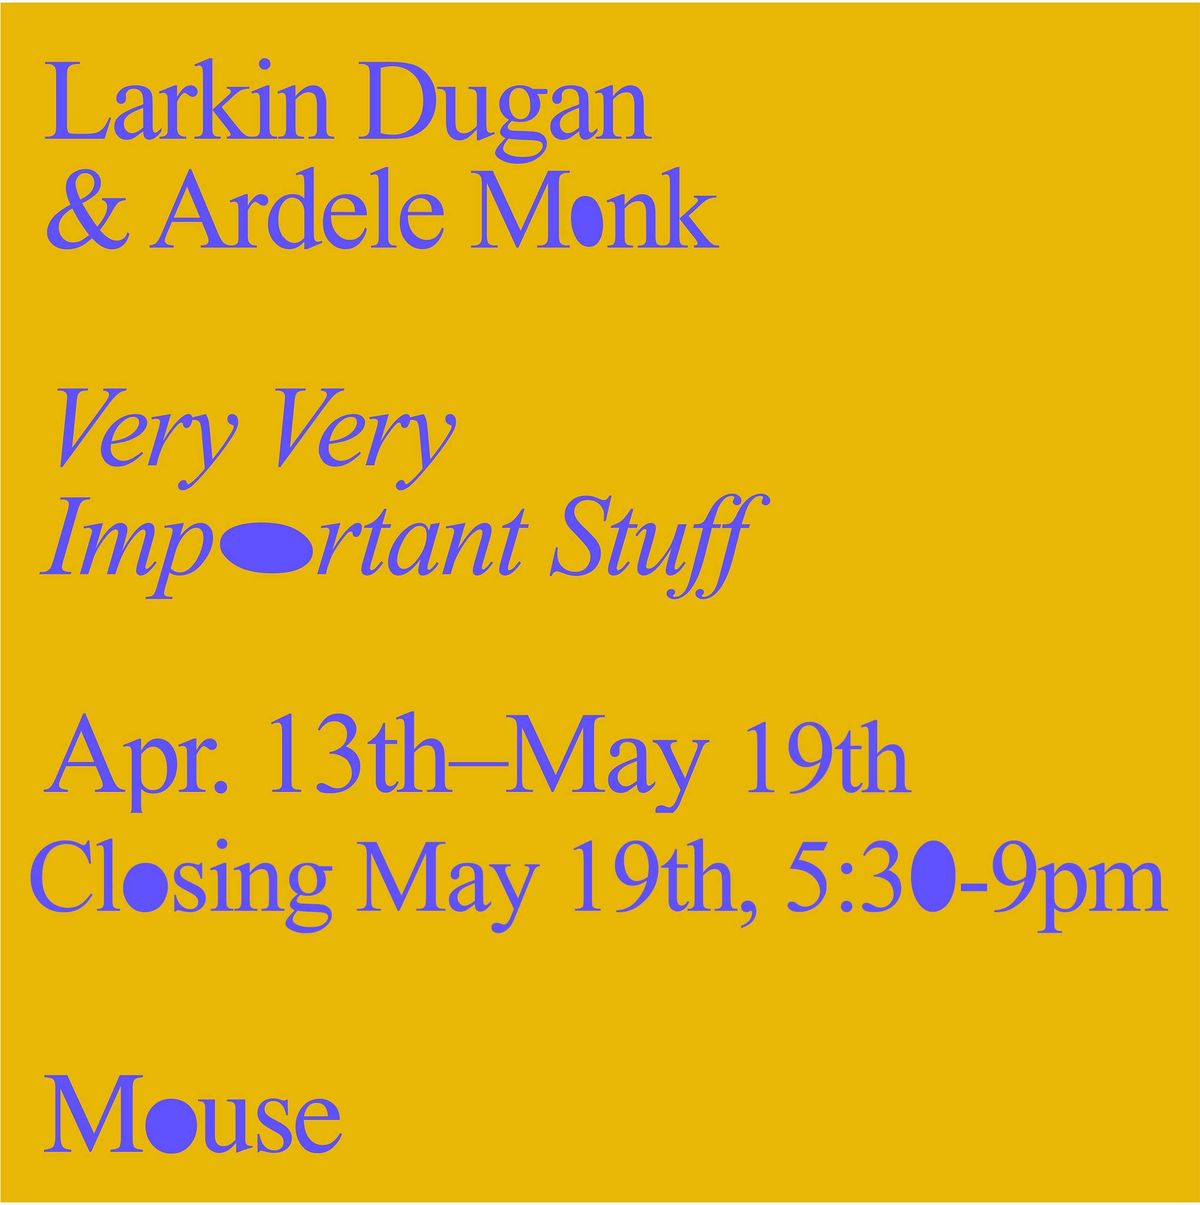 Closing for "Very Very Important Stuff" new work by Larkin Dugan & Ardele Monk